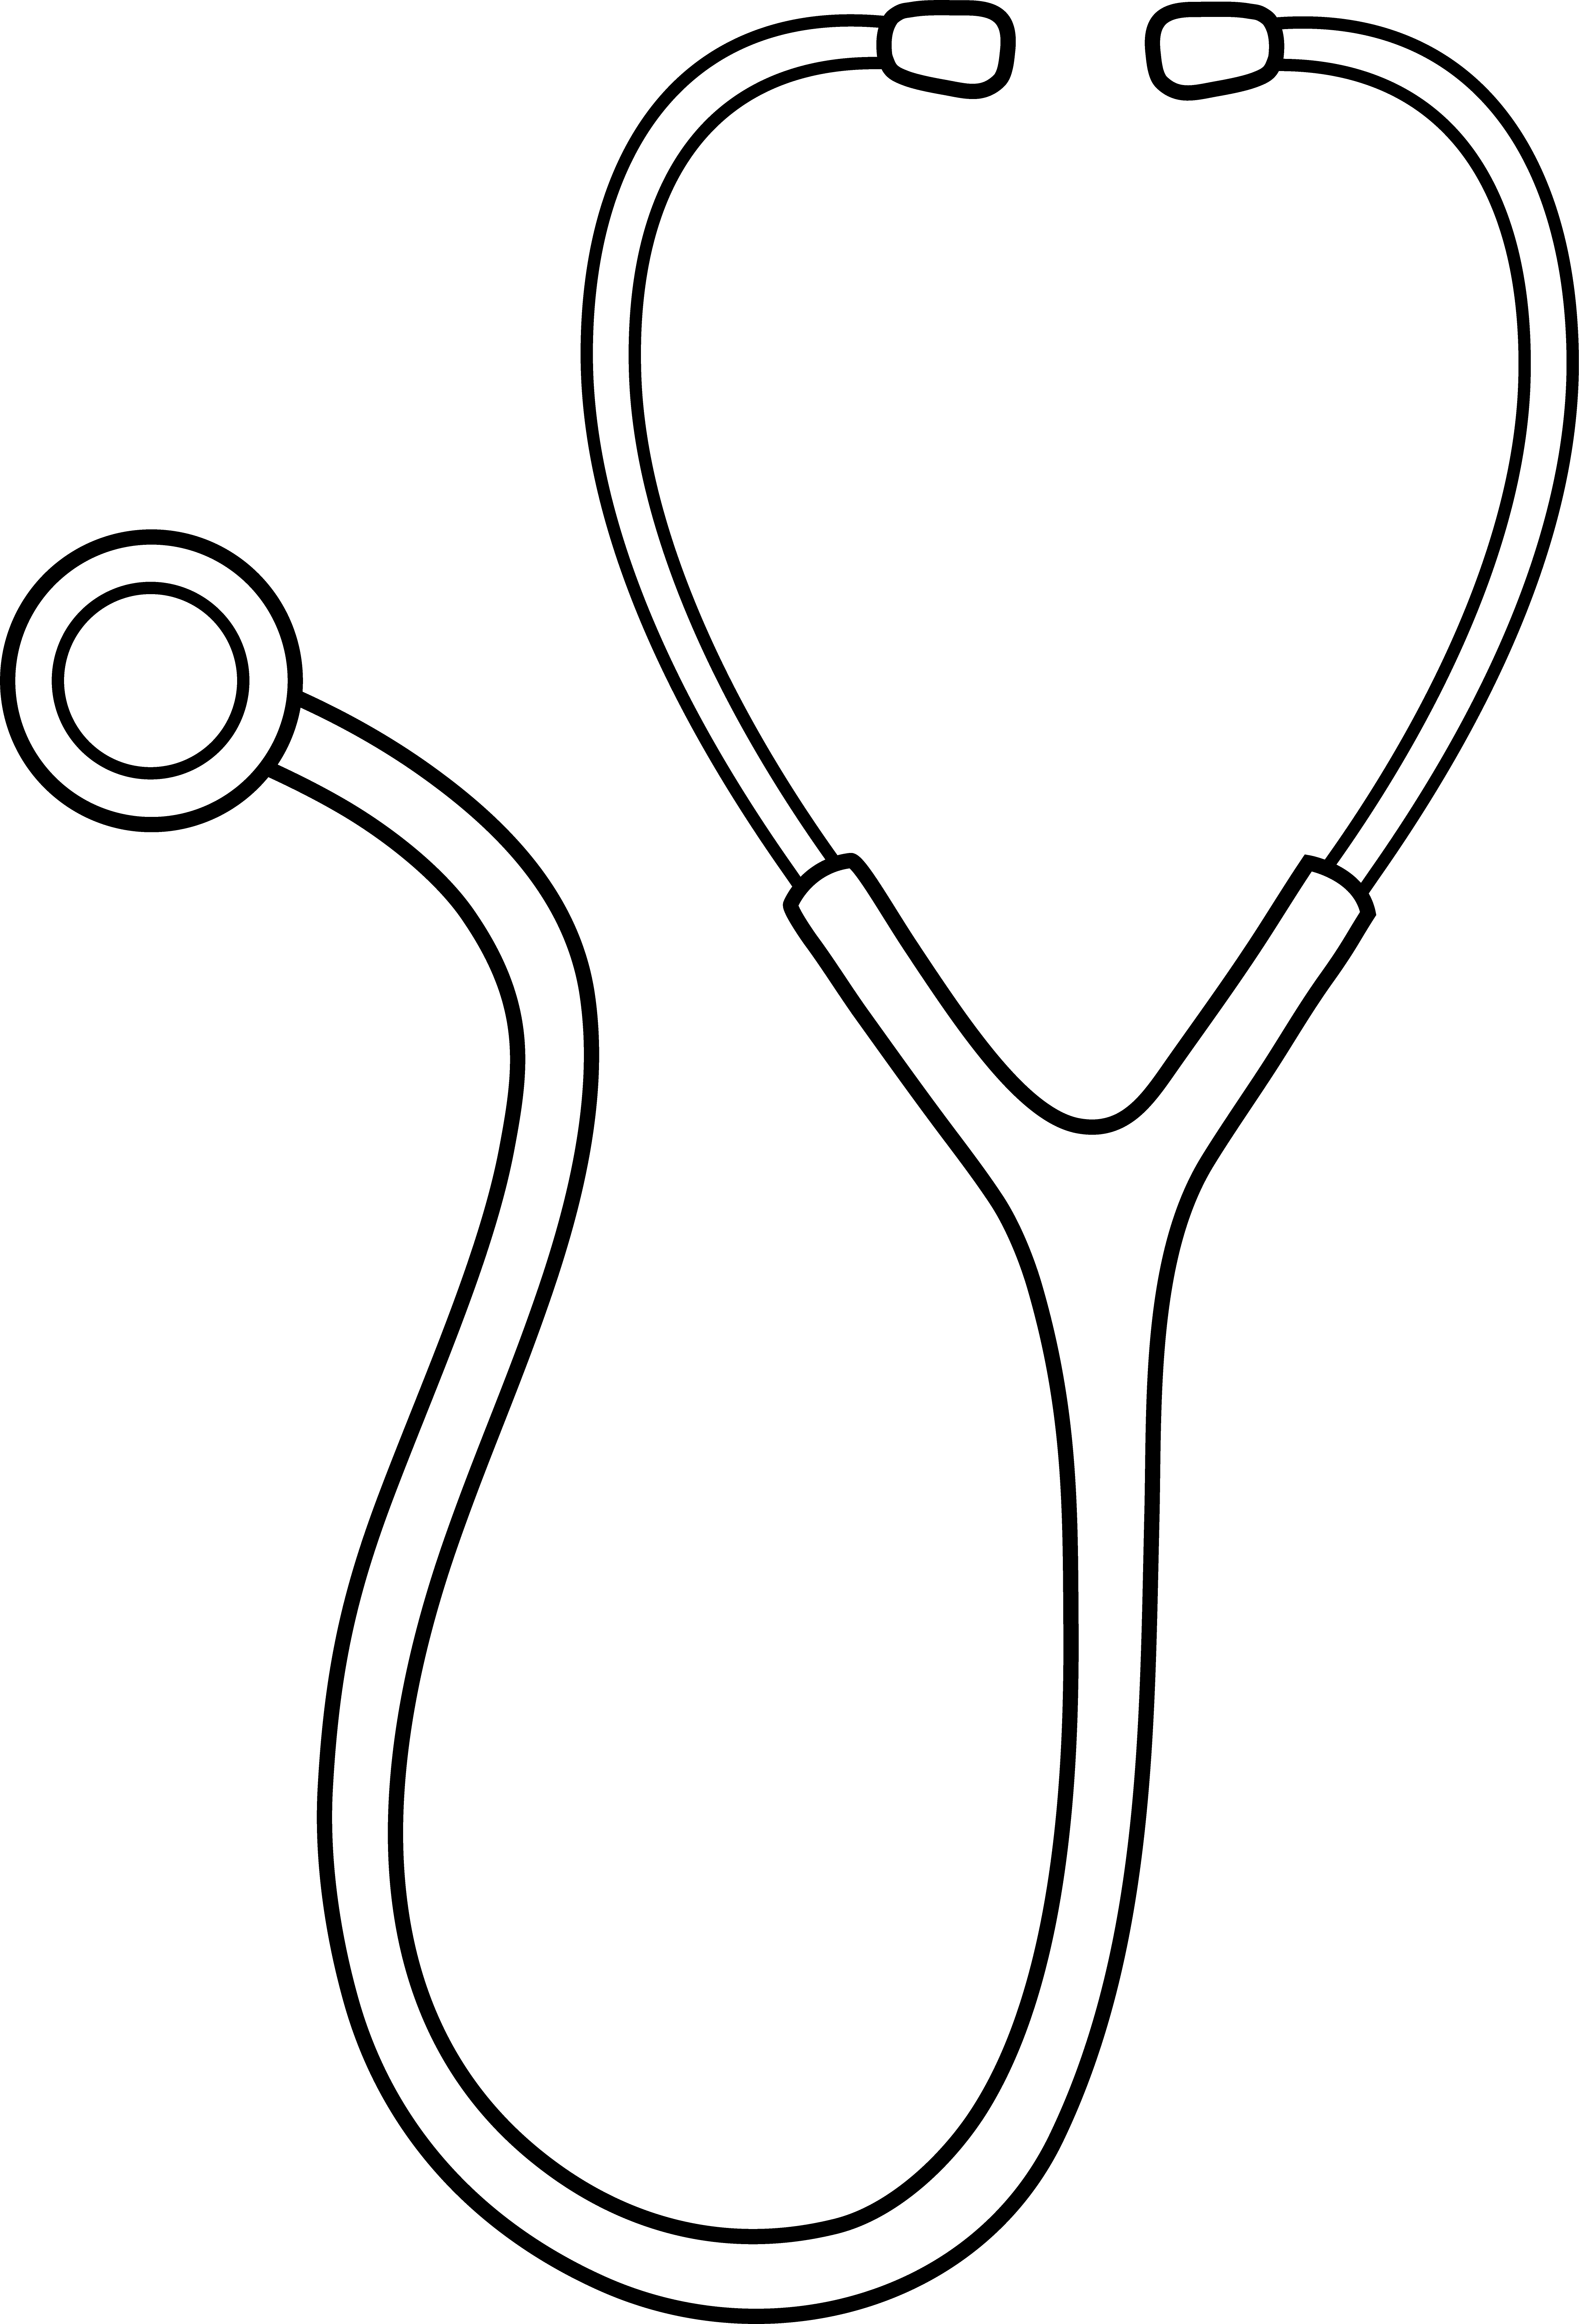 Medical Clipart Black And White | Clipart Panda - Free Clipart Images